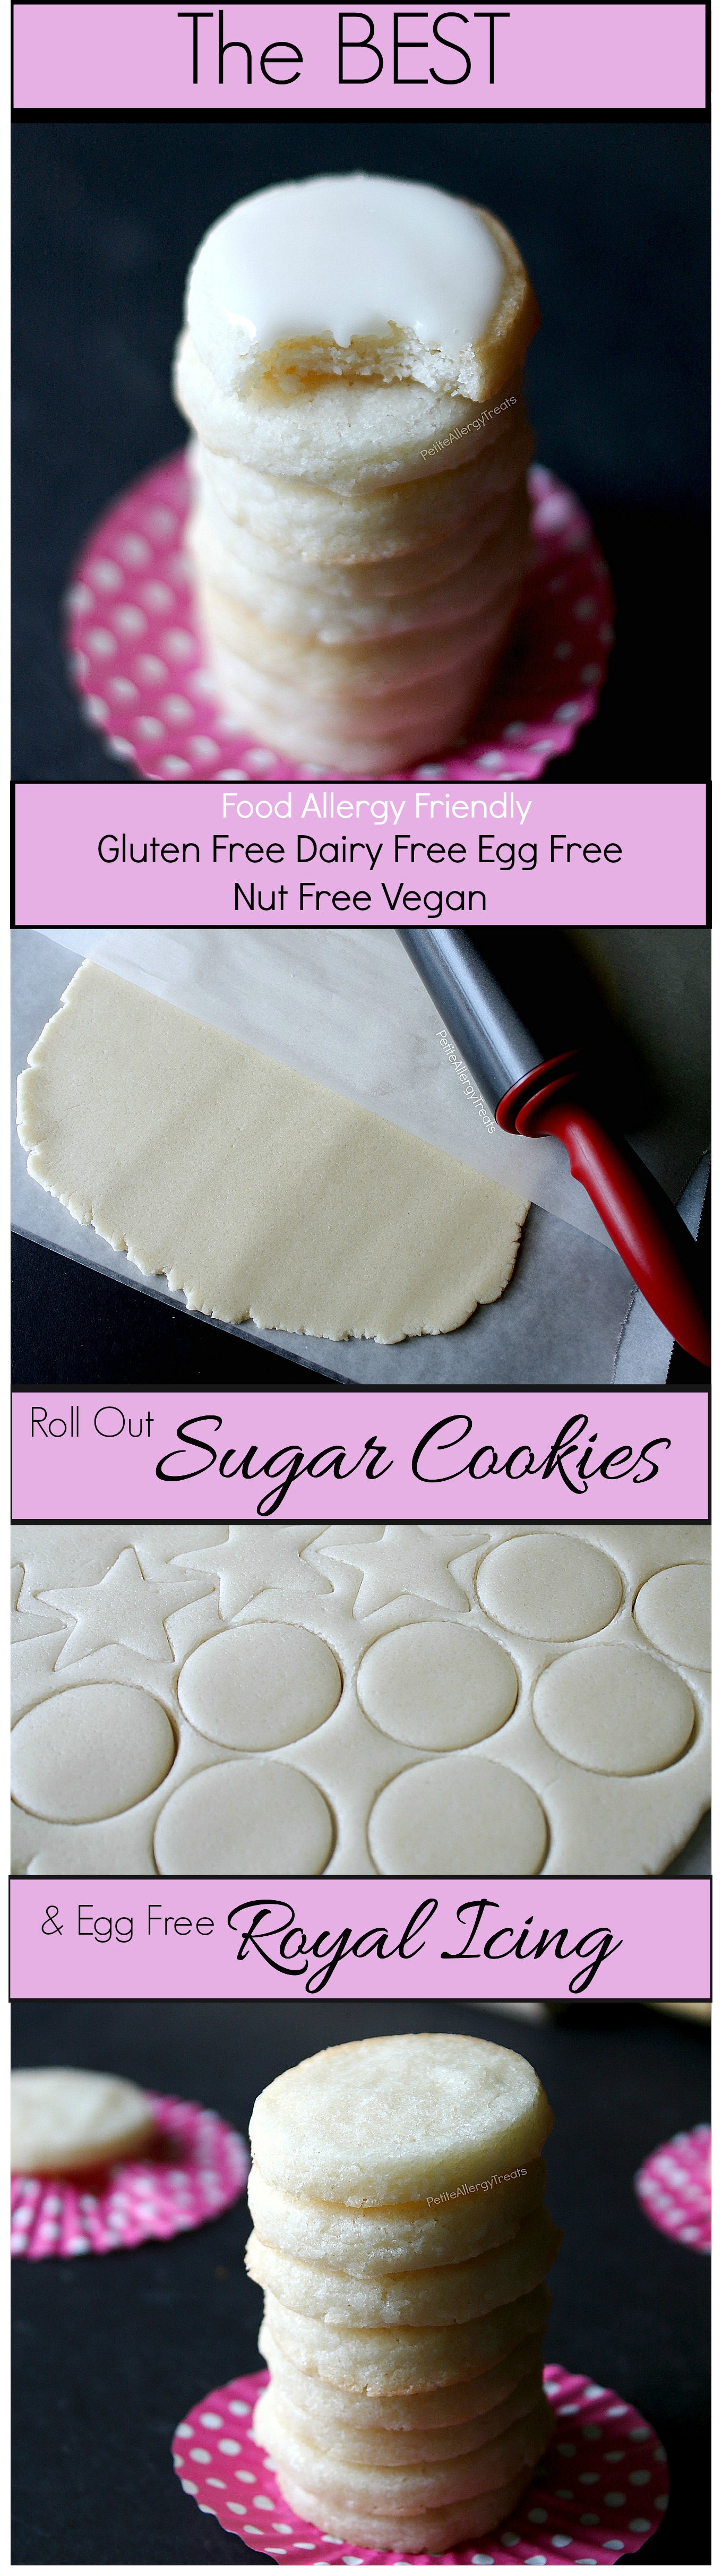 Gluten Free Sugar Cookies Recipe w/ egg free Royal Icing (Vegan dairy free egg free)- Easy roll out sugar cookies! Perfect for Christmas. Food Allergy friendly.